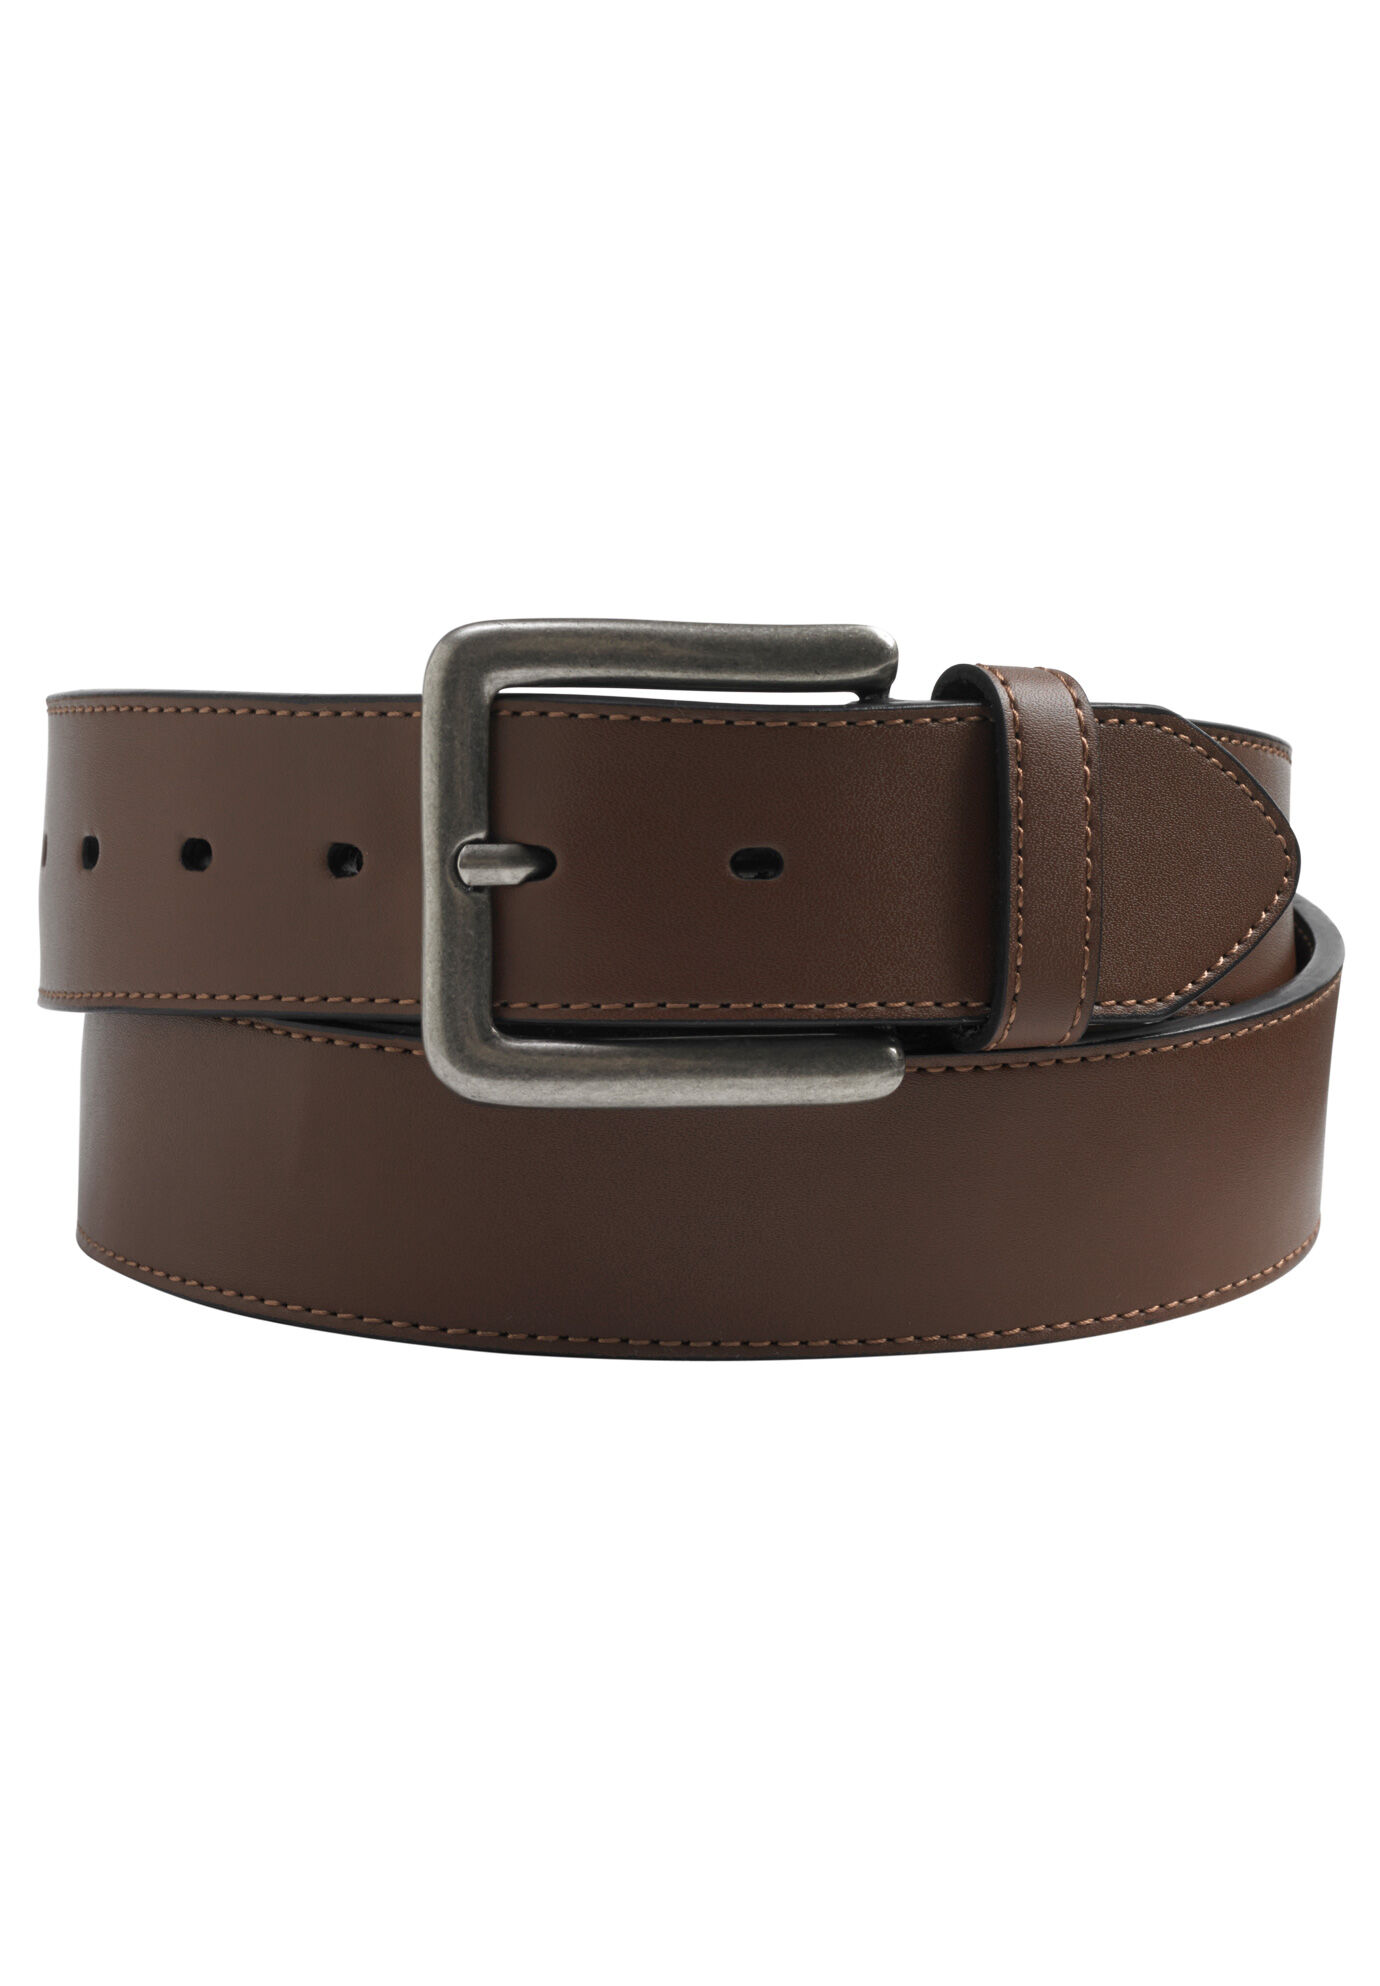 Kingsize Men's Big & Tall Casual Stitched Edge Leather Belt - image 1 of 2